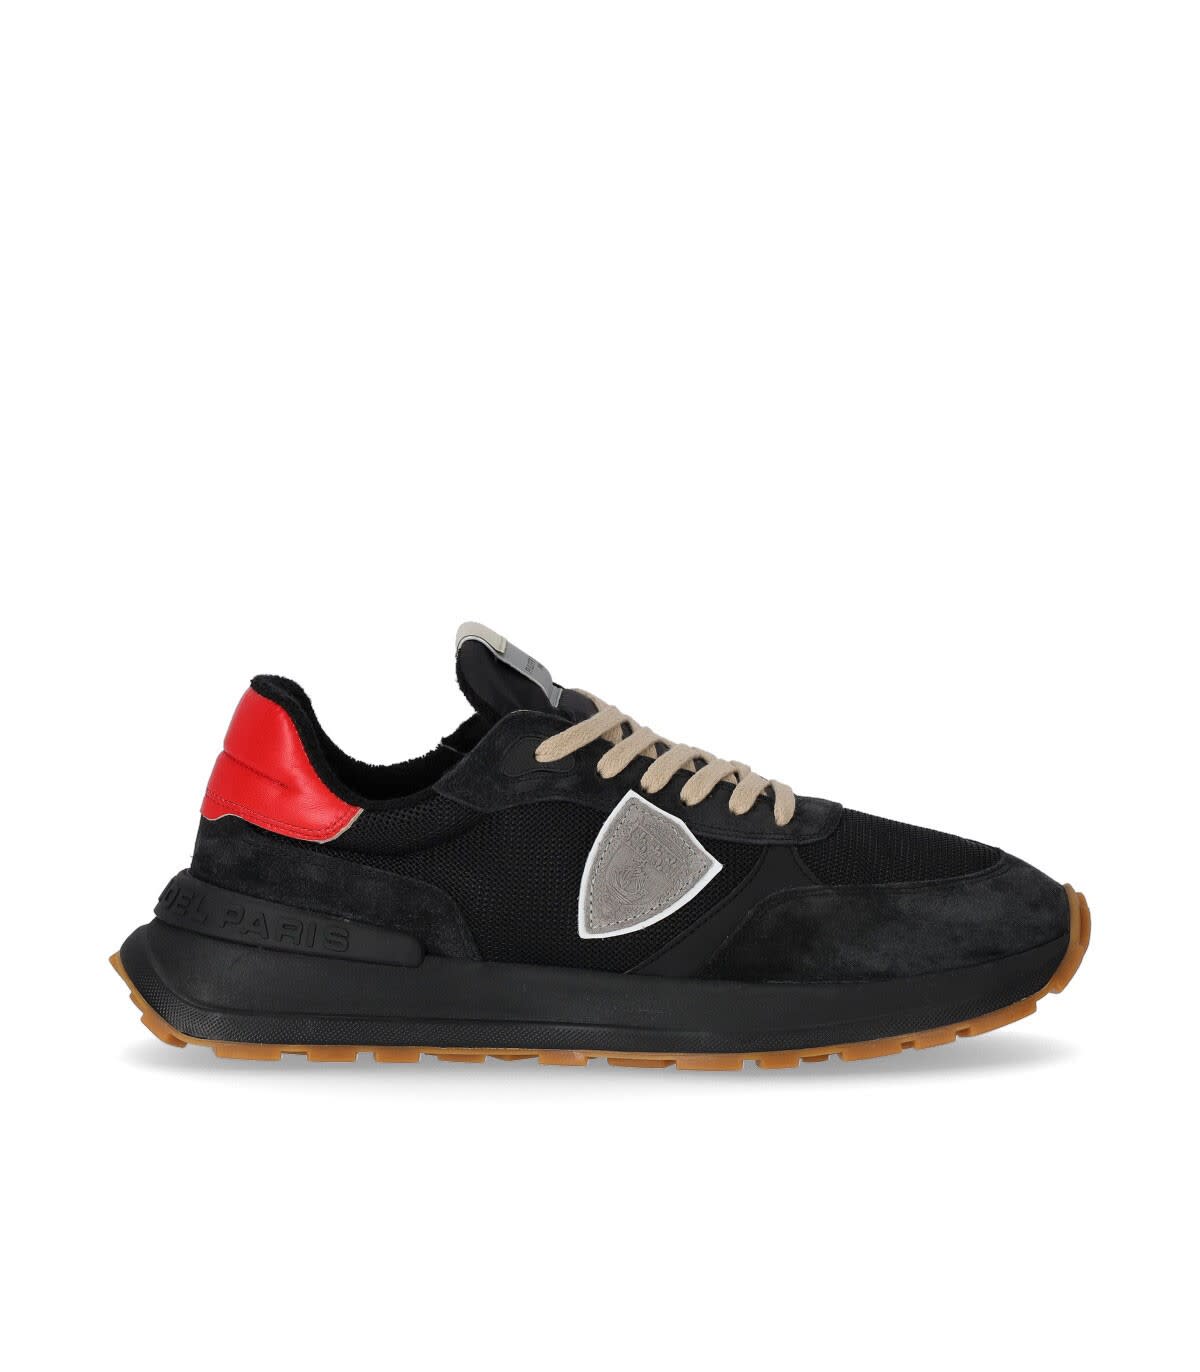 PHILIPPE MODEL PHILIPPE MODEL ANTIBES LOW BLACK RED SNEAKER